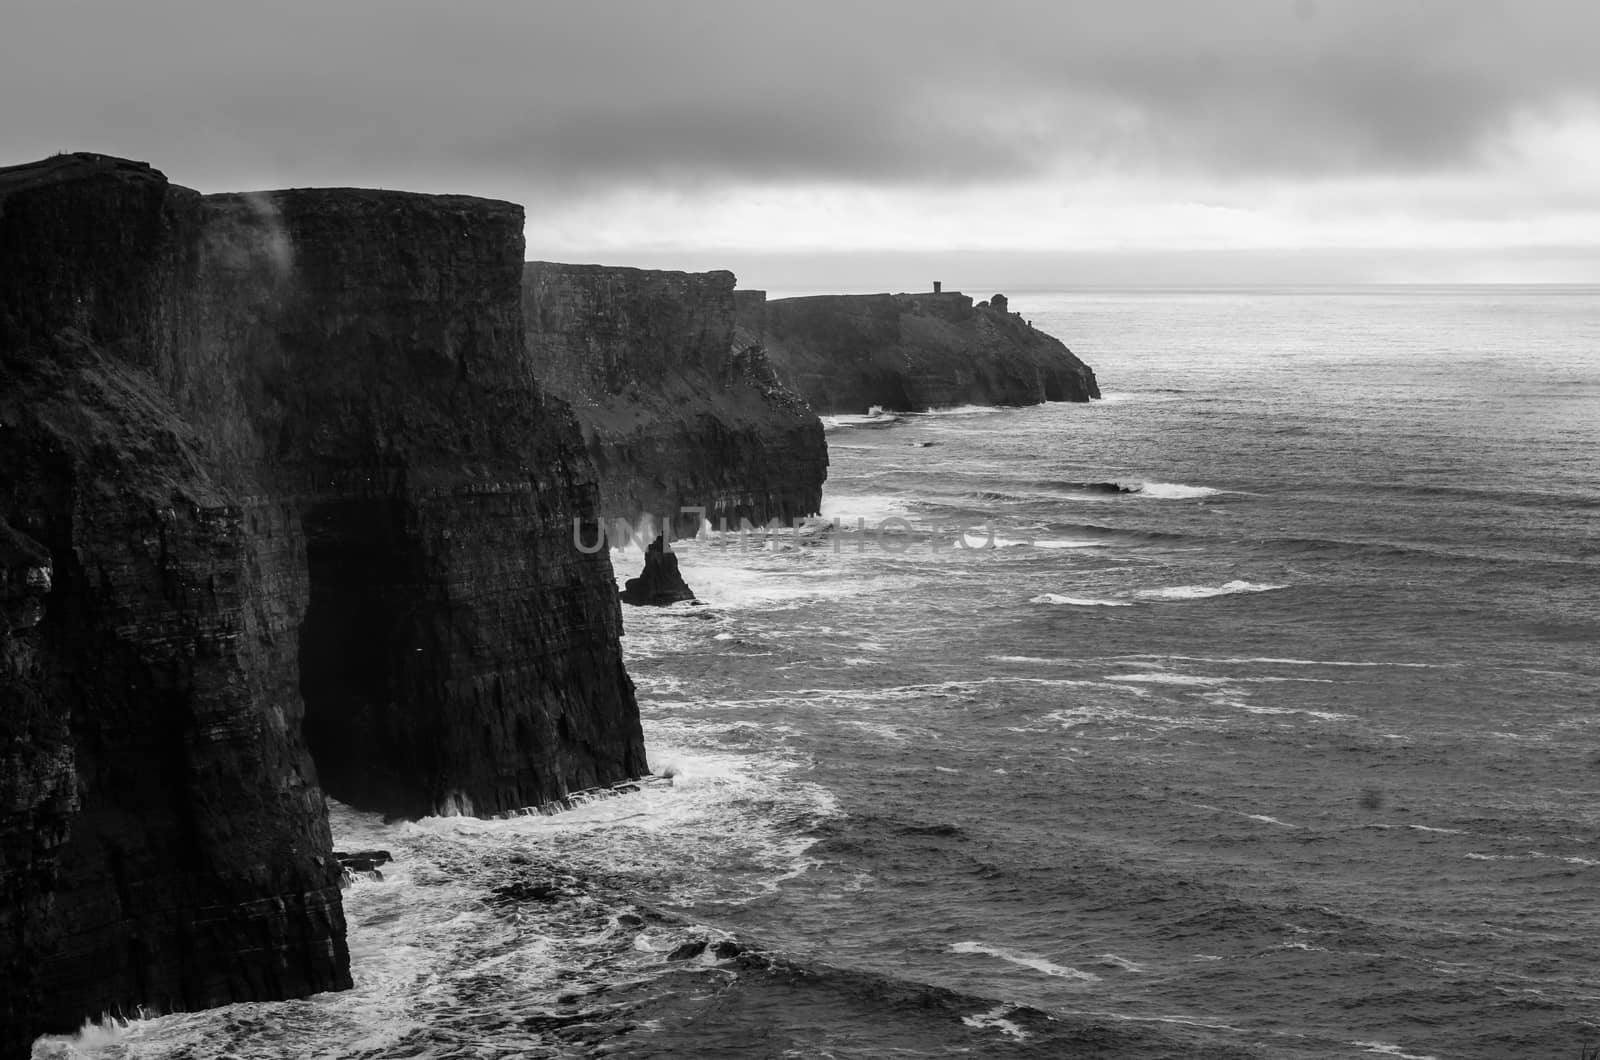  Panoramic view of the Cliff of Moher in a cloudy wintery day, Ireland by mauricallari